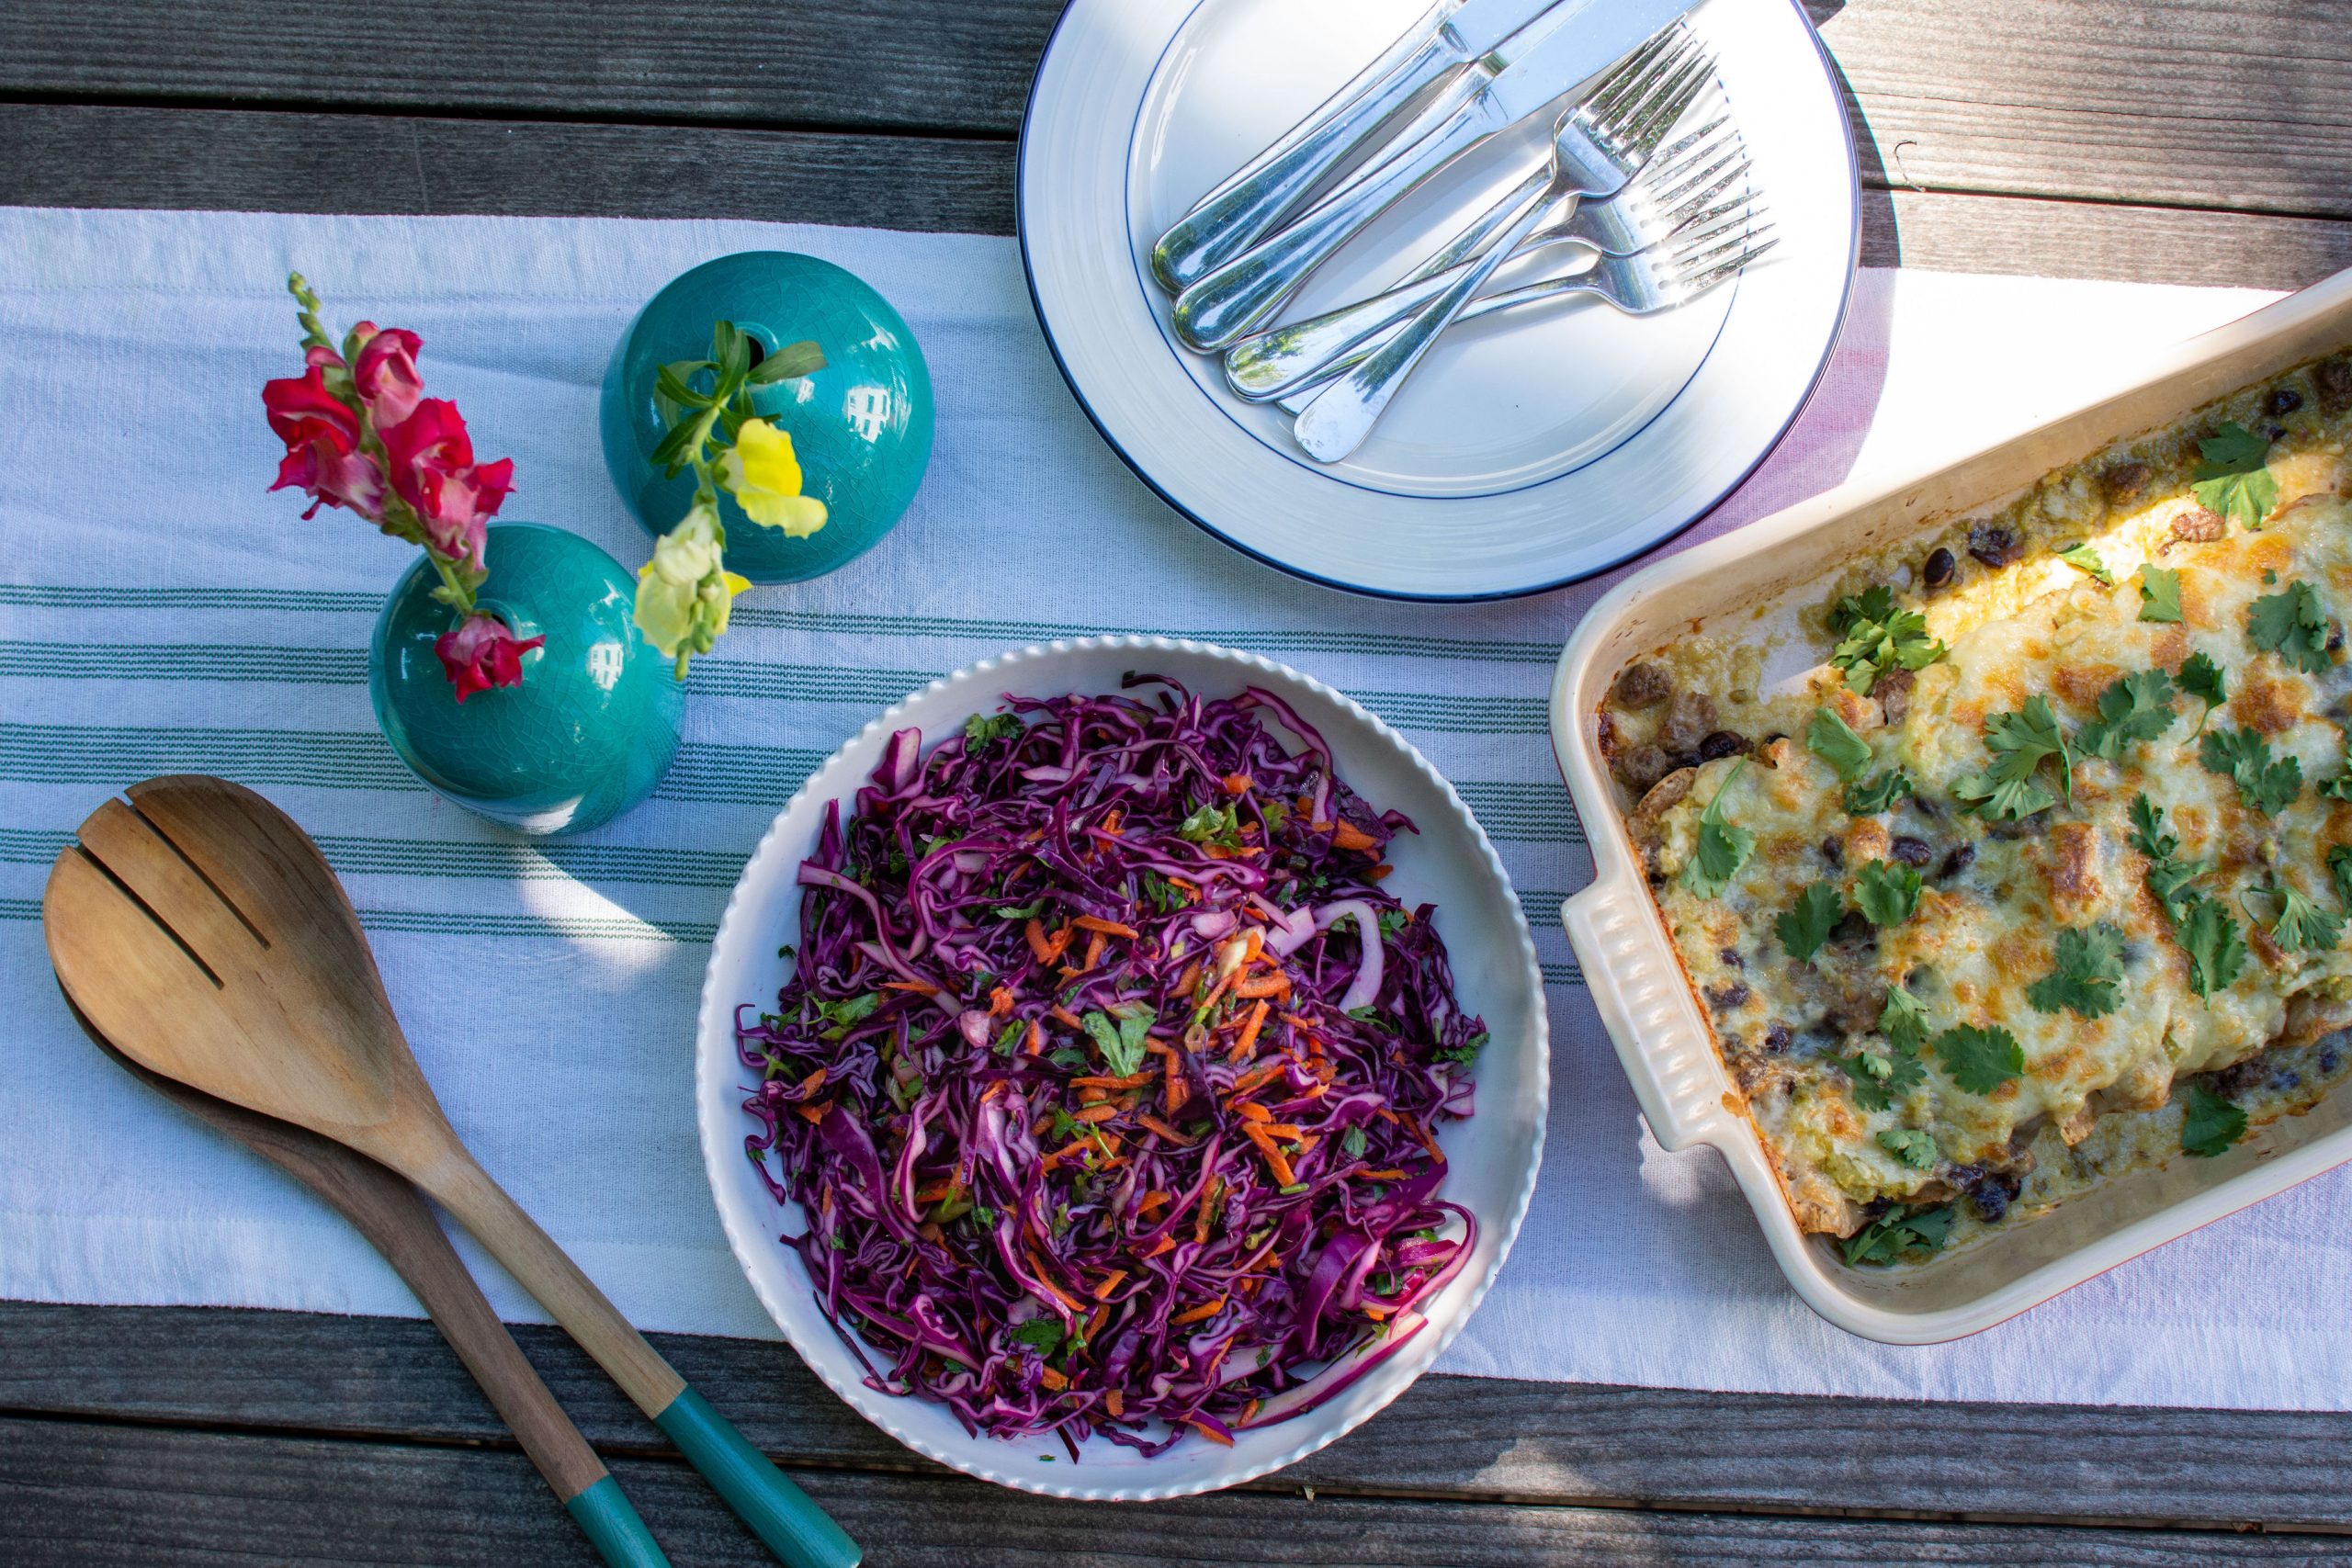 Photo of dinner set on table with beef enchiladas, purple slaw, and turquoise vases of flowers. Boston Area Meal Delivery Service.